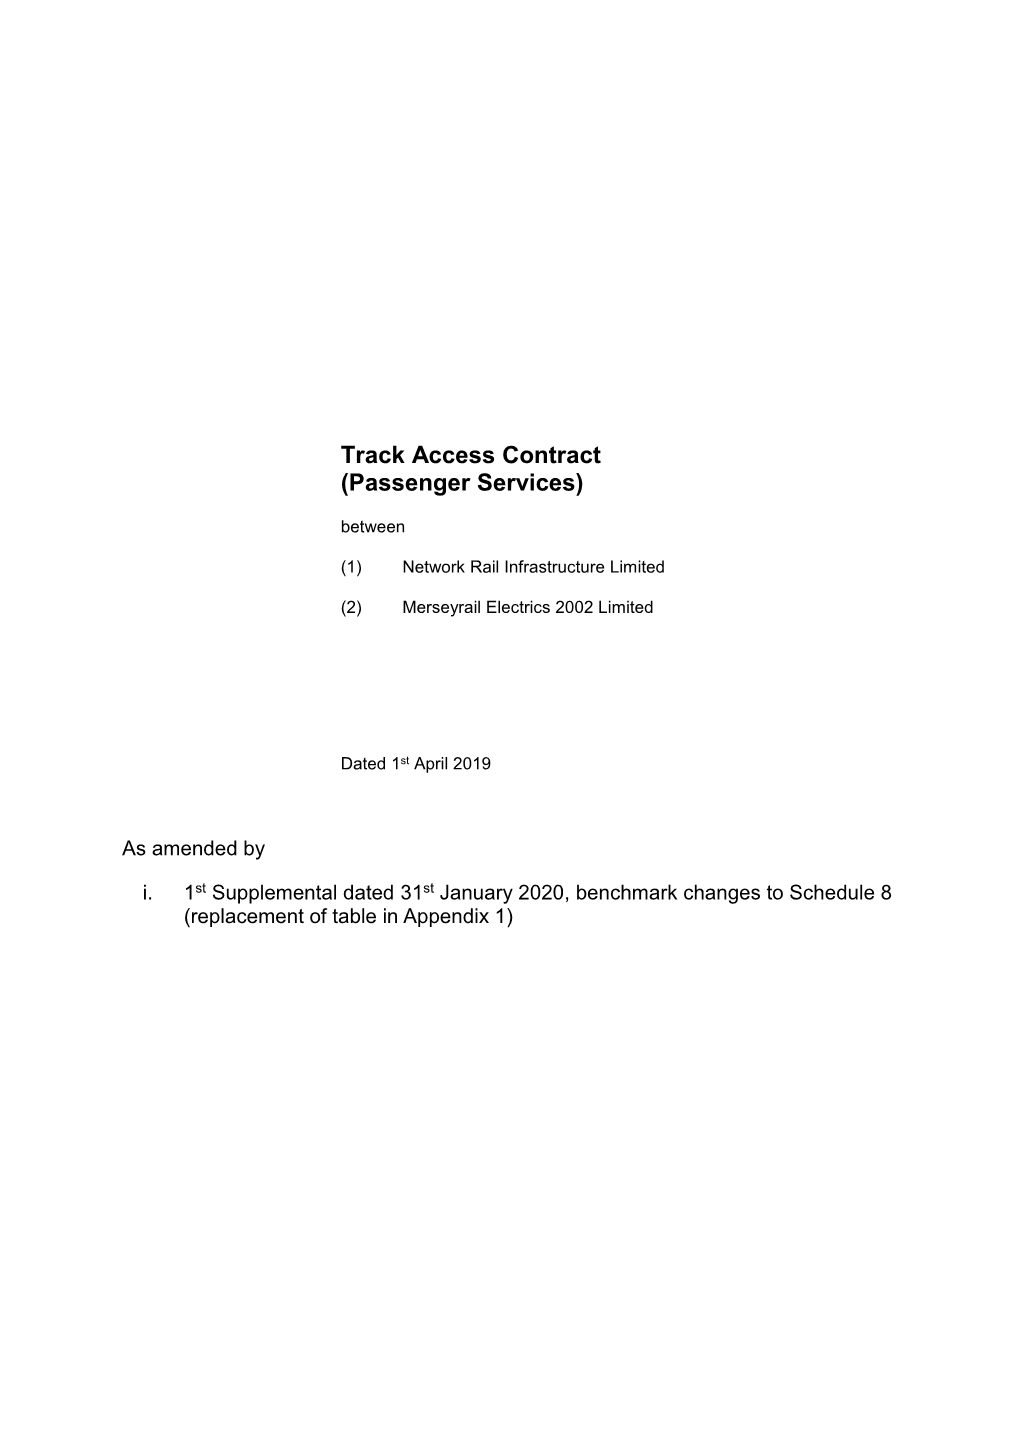 Merseyrail Electrics 2002 Limited Track Access Consolidated Contract